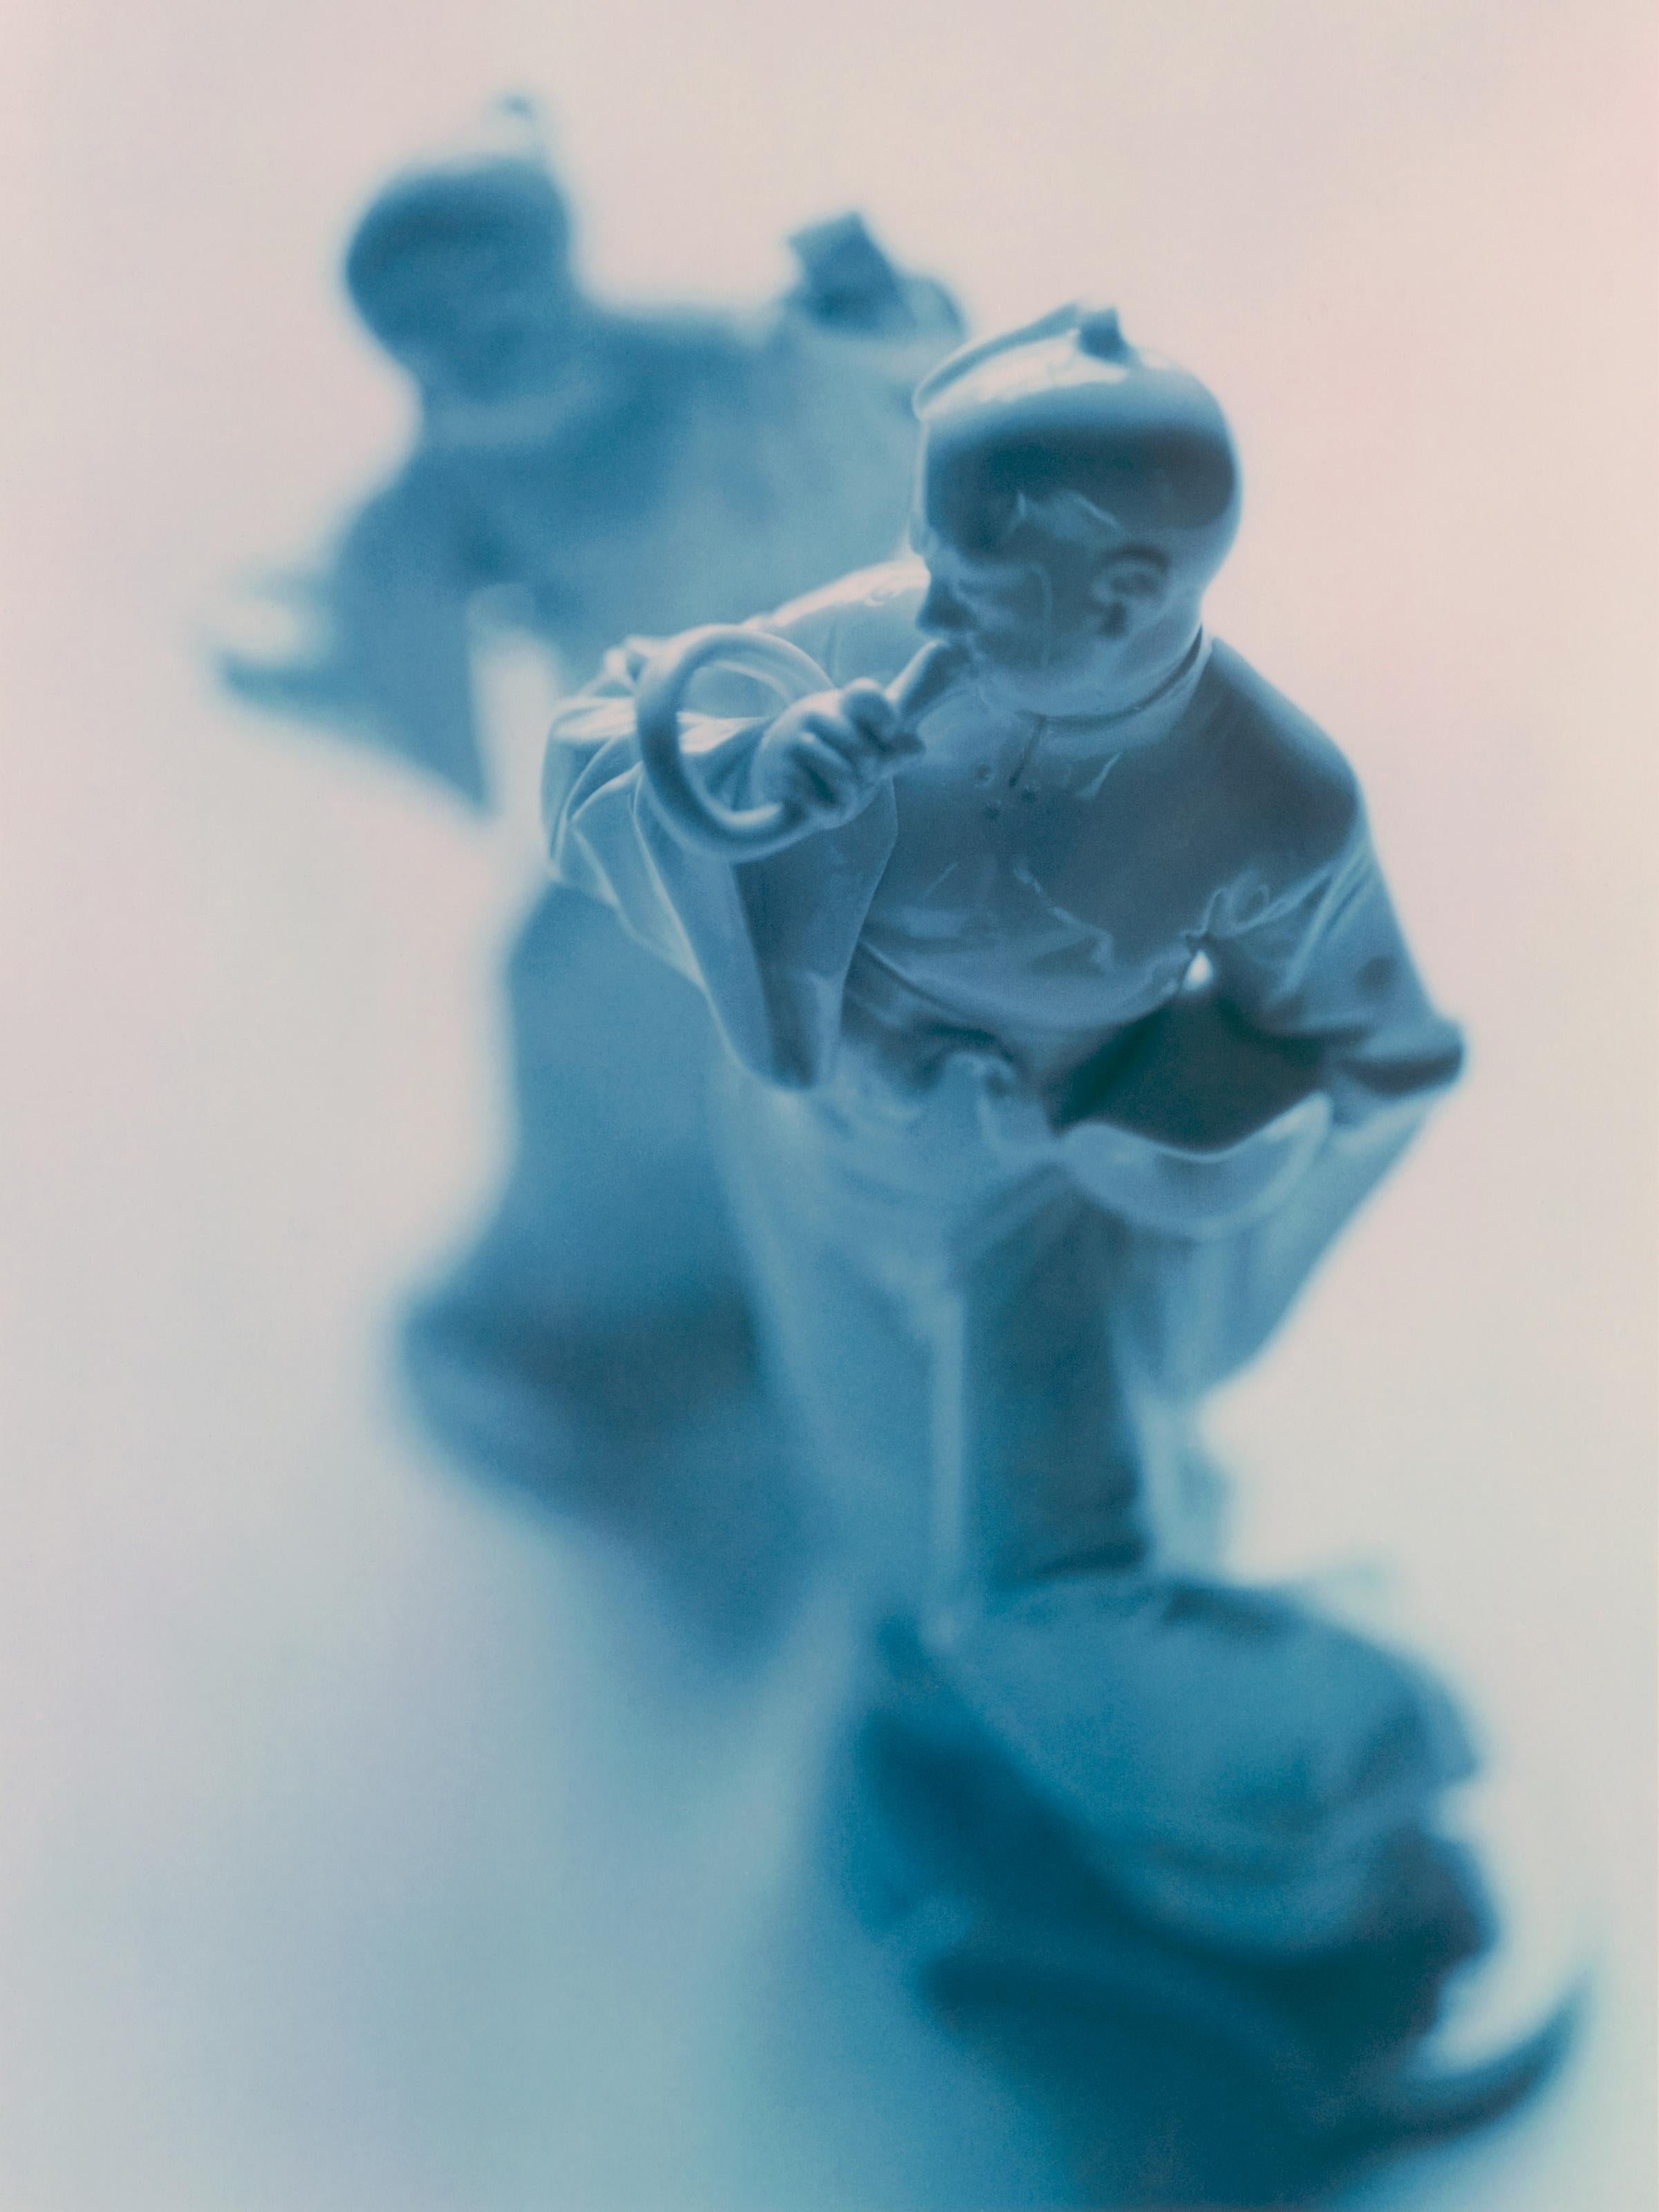 Don Freeman
Chinese Porcelain Figures (Nymphenburg) #2
Nymphenburg Porcelain Manufactory 
Frank Anton Bustelli, (1750) 
Digital Print on Hahnemulhe Fine Art Paper
From a hand-toned silver gelatin print (2001) 
Edition of 7 

Also available in 26" x